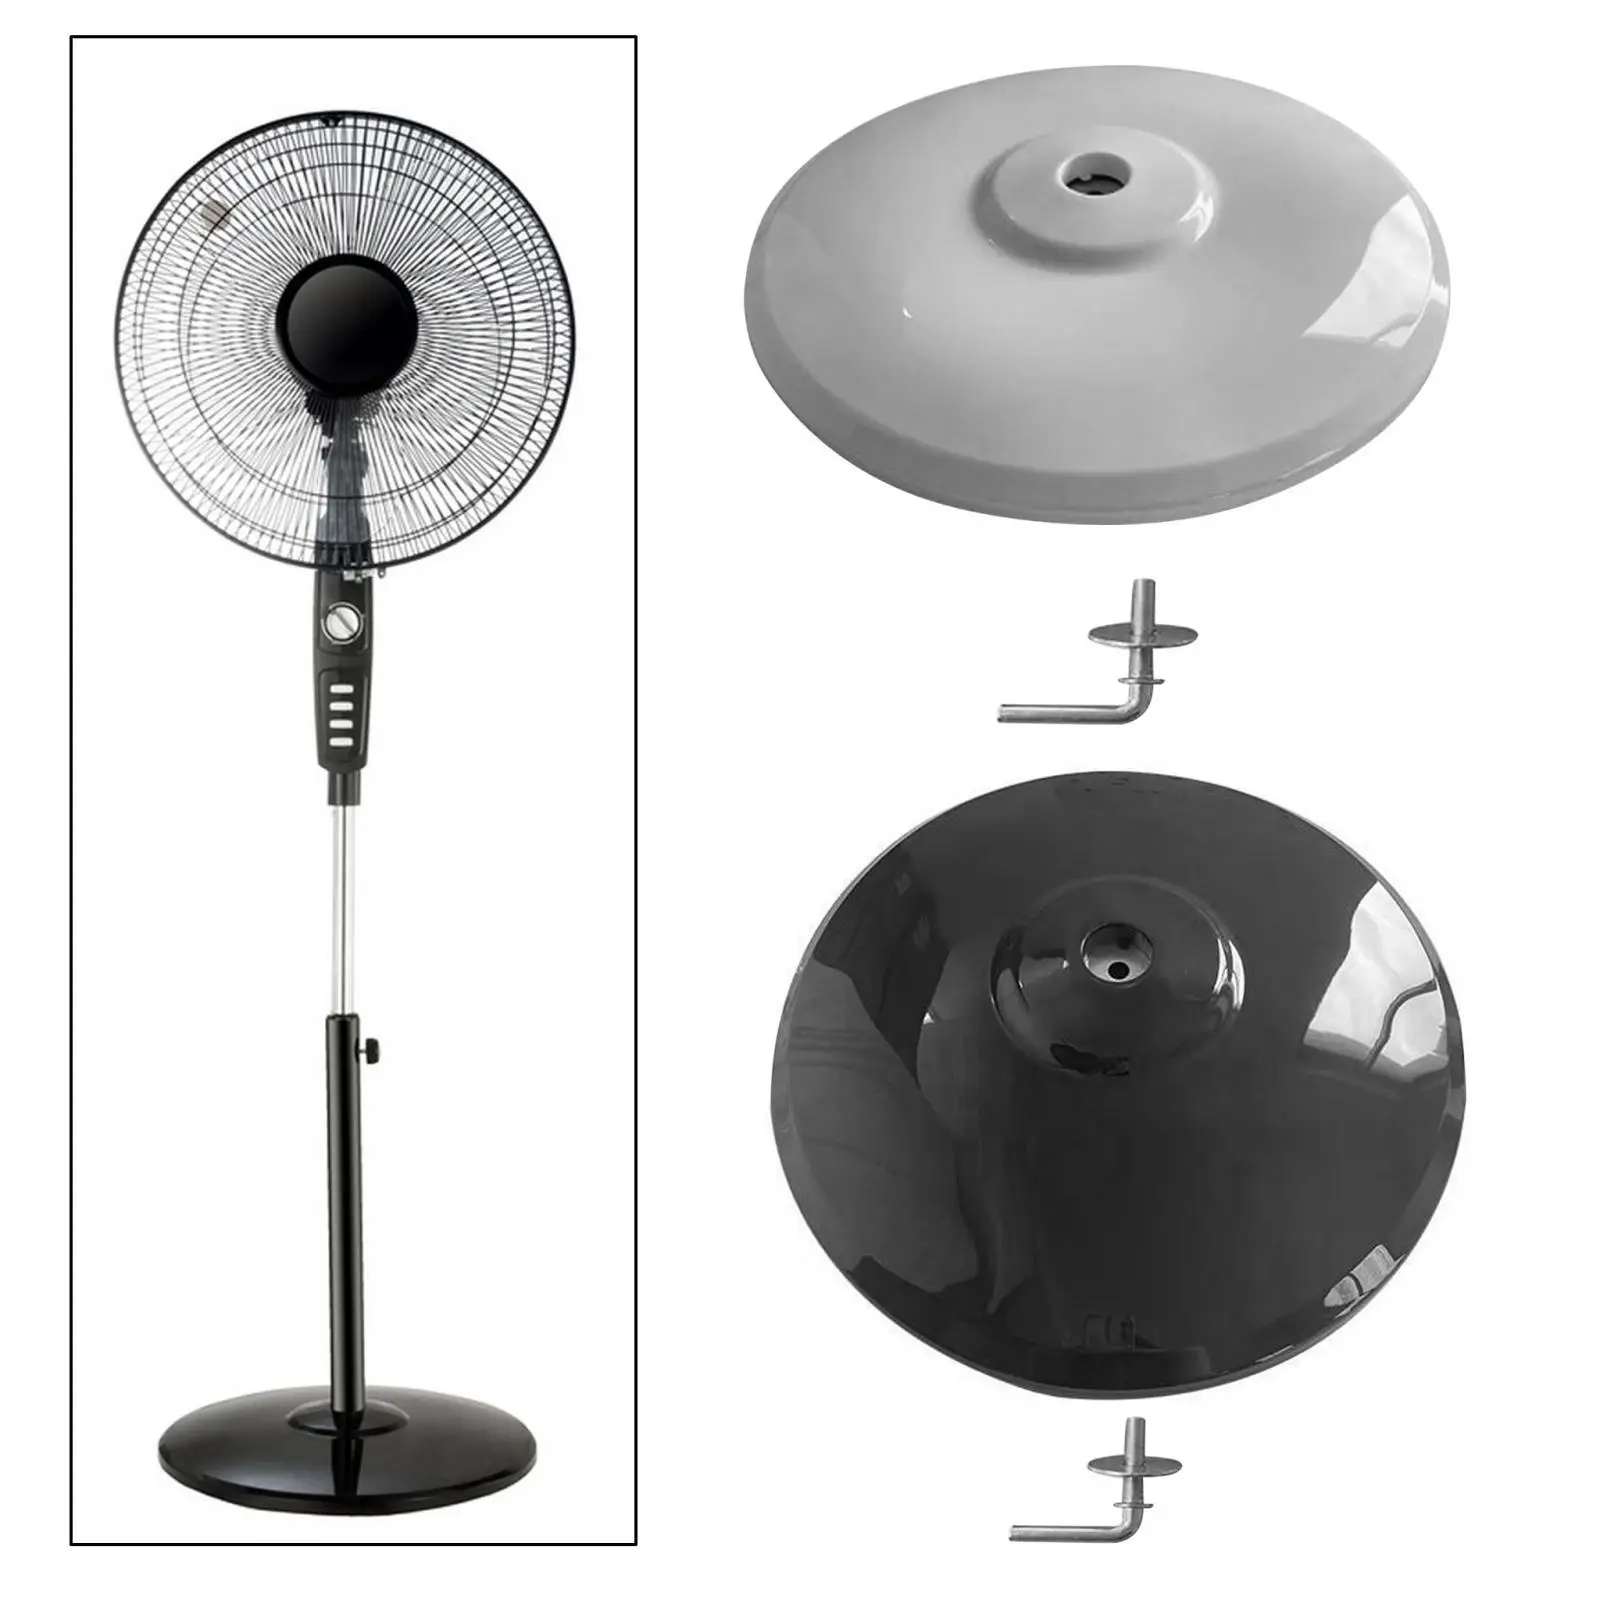 Floor Standing Round Base 15.67`` Diameter Universal Portable Floor to Ceiling Fan Chassis for Office Camping Outdoor Desk Hotel